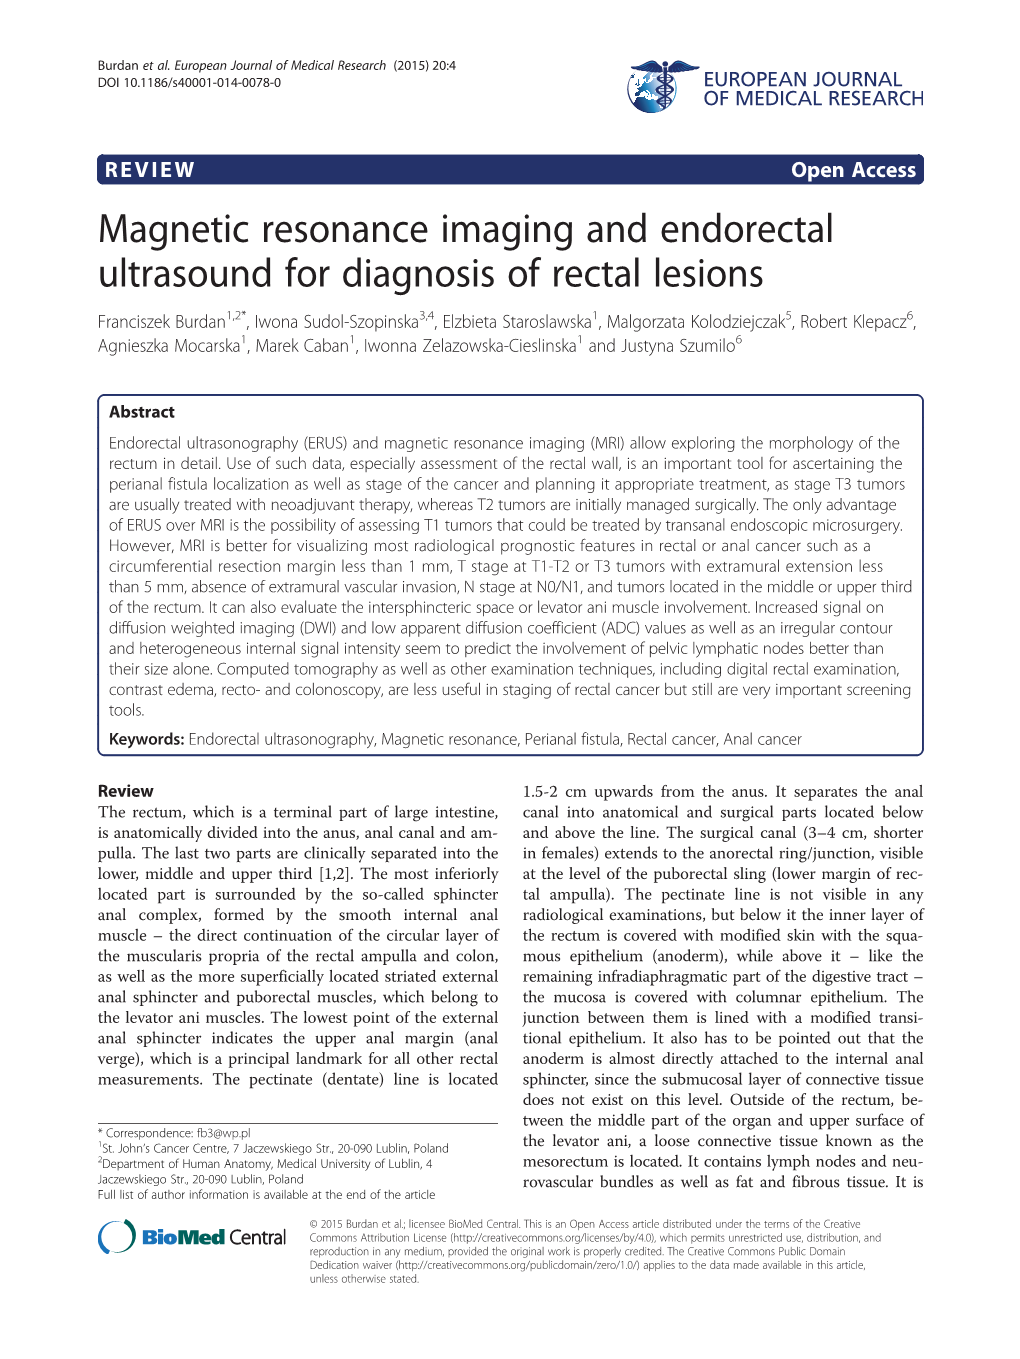 Magnetic Resonance Imaging and Endorectal Ultrasound for Diagnosis